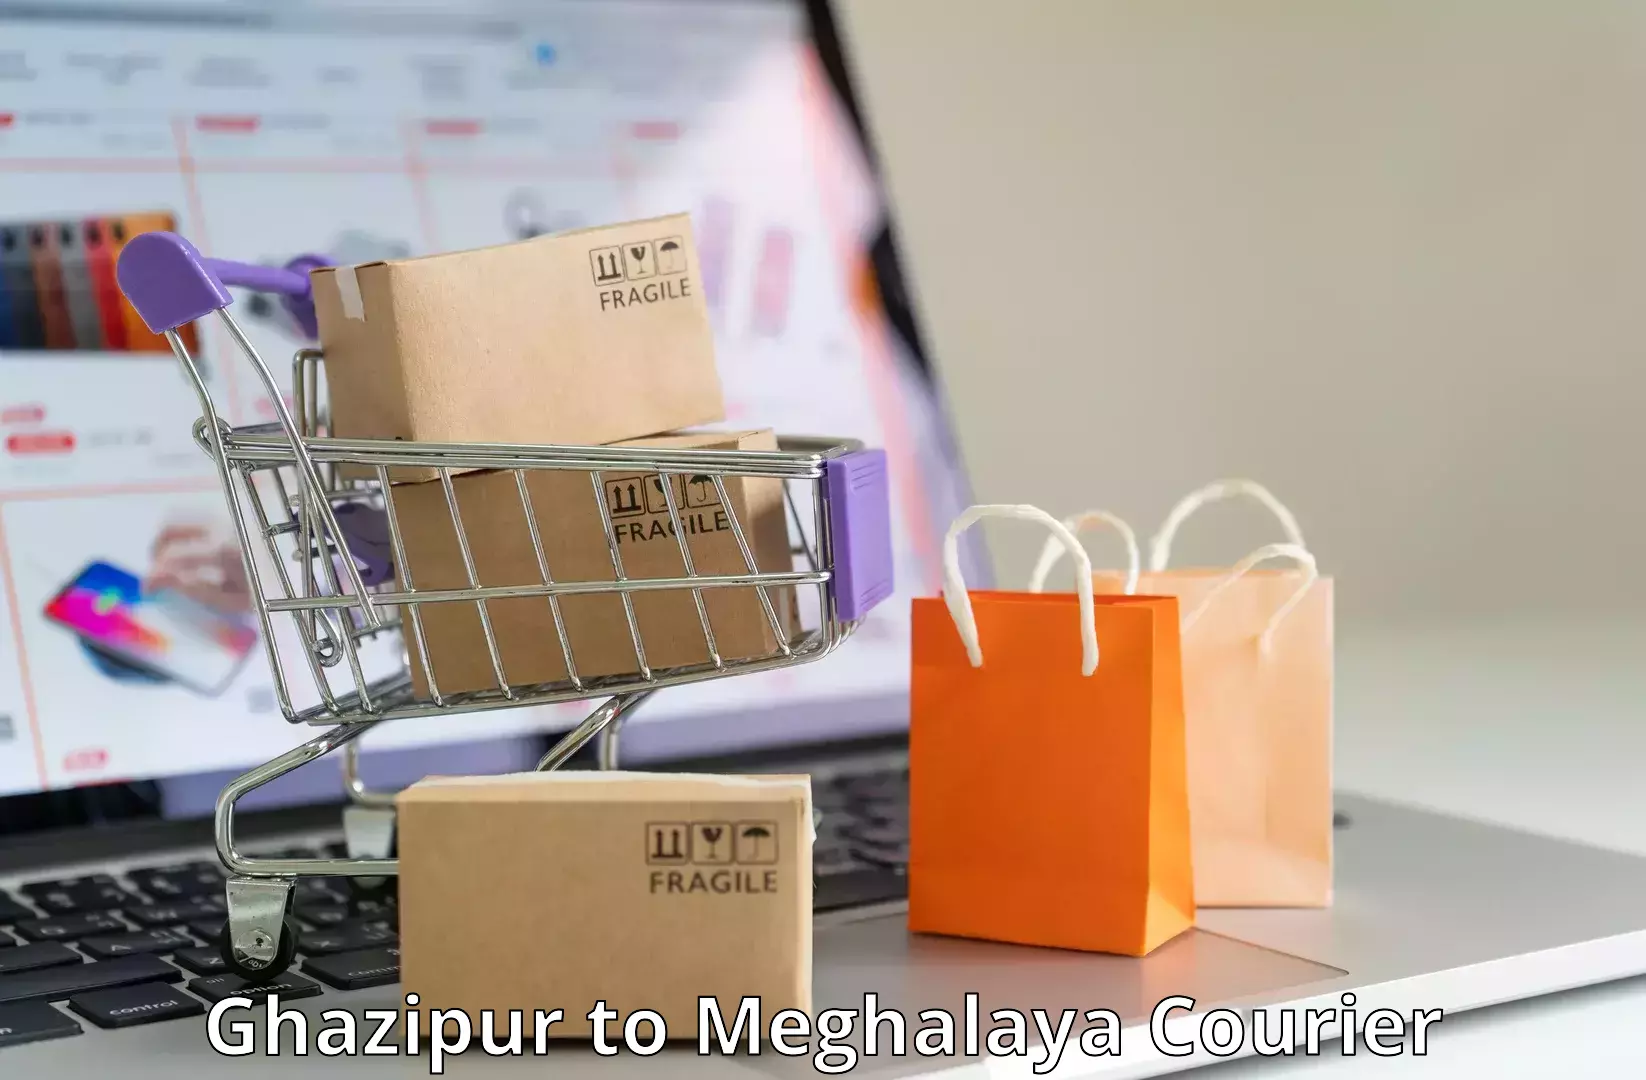 Nationwide delivery network Ghazipur to Meghalaya